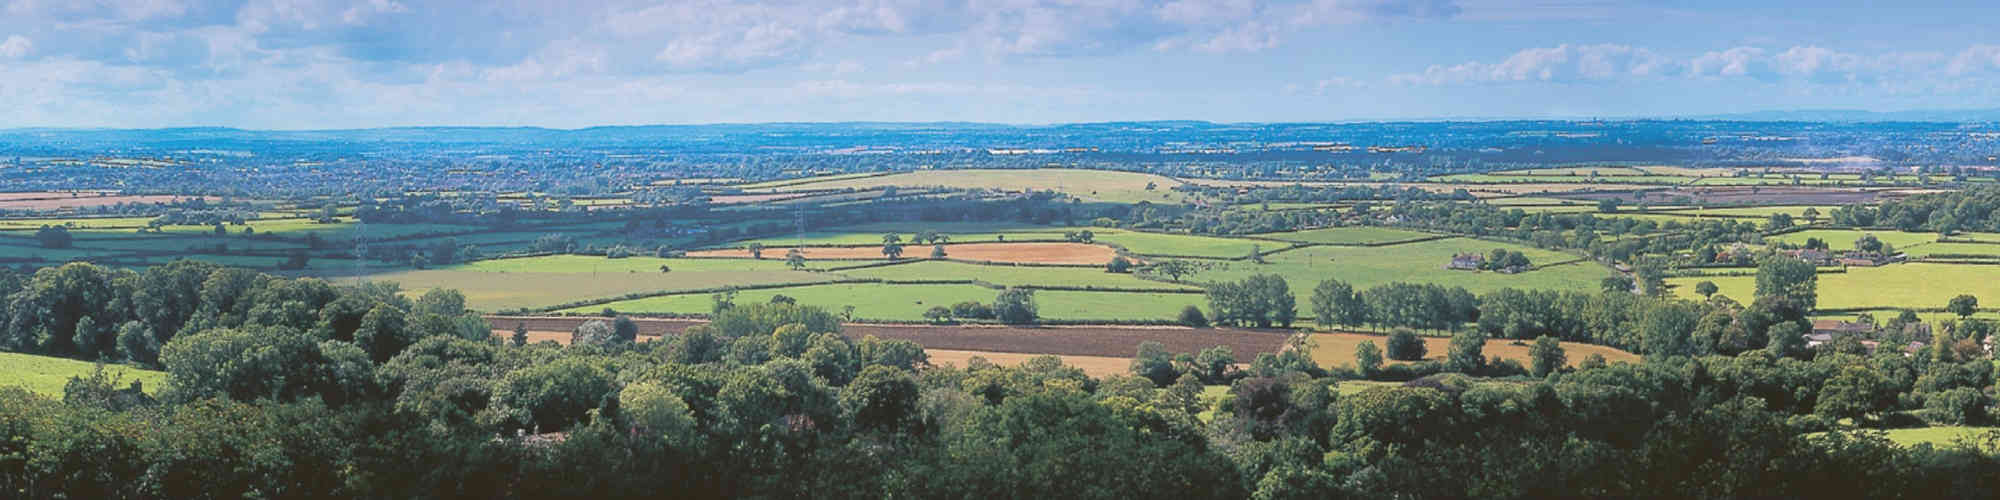 Landscape view over South Gloucestershire